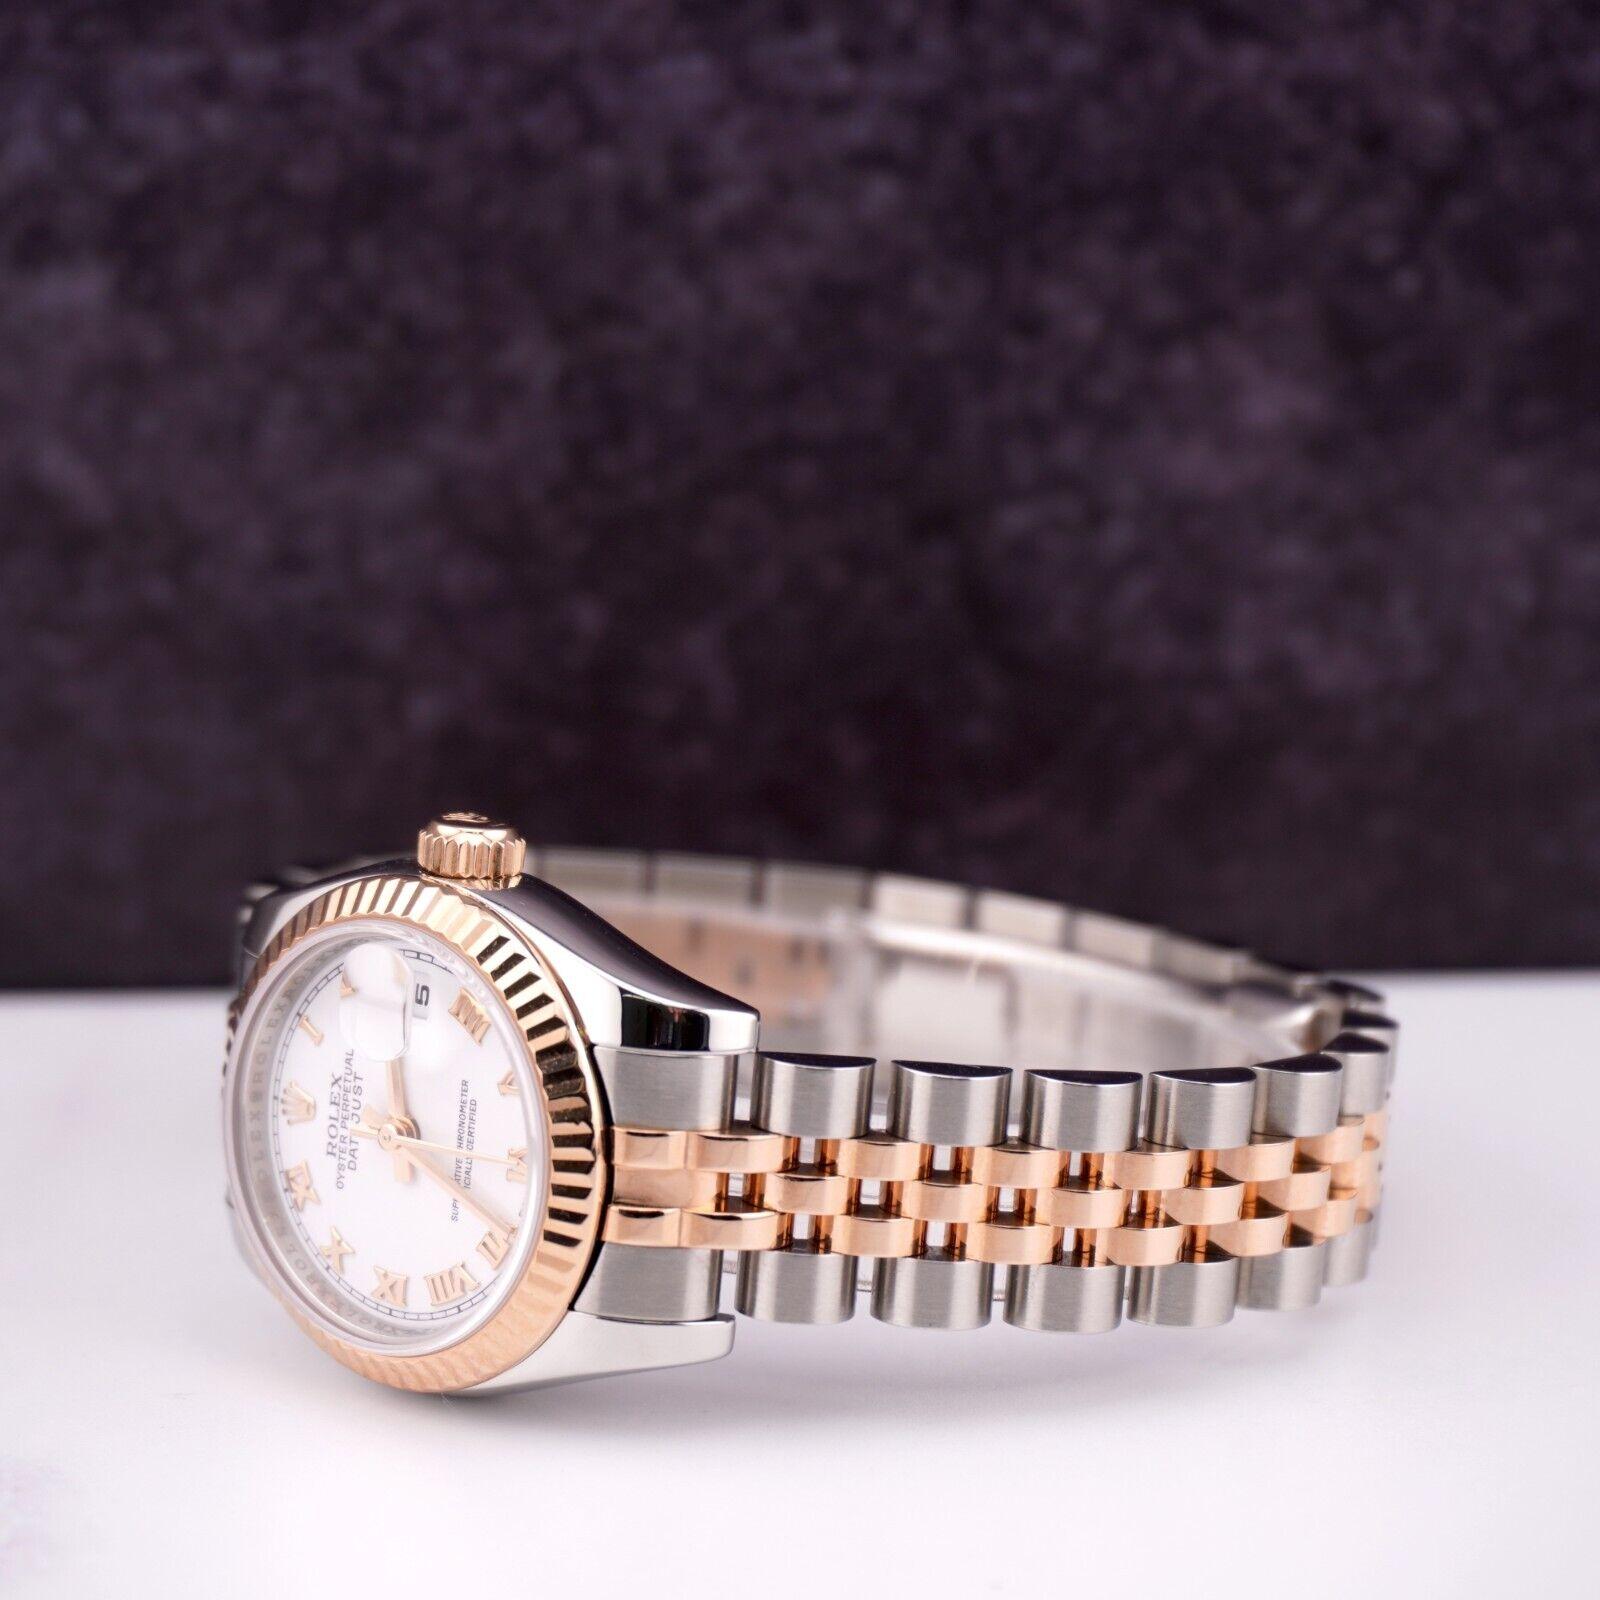 Women's or Men's Rolex Datejust 26mm 18k Rose Gold & Steel Fluted Jubilee White Dial Watch 179171 For Sale